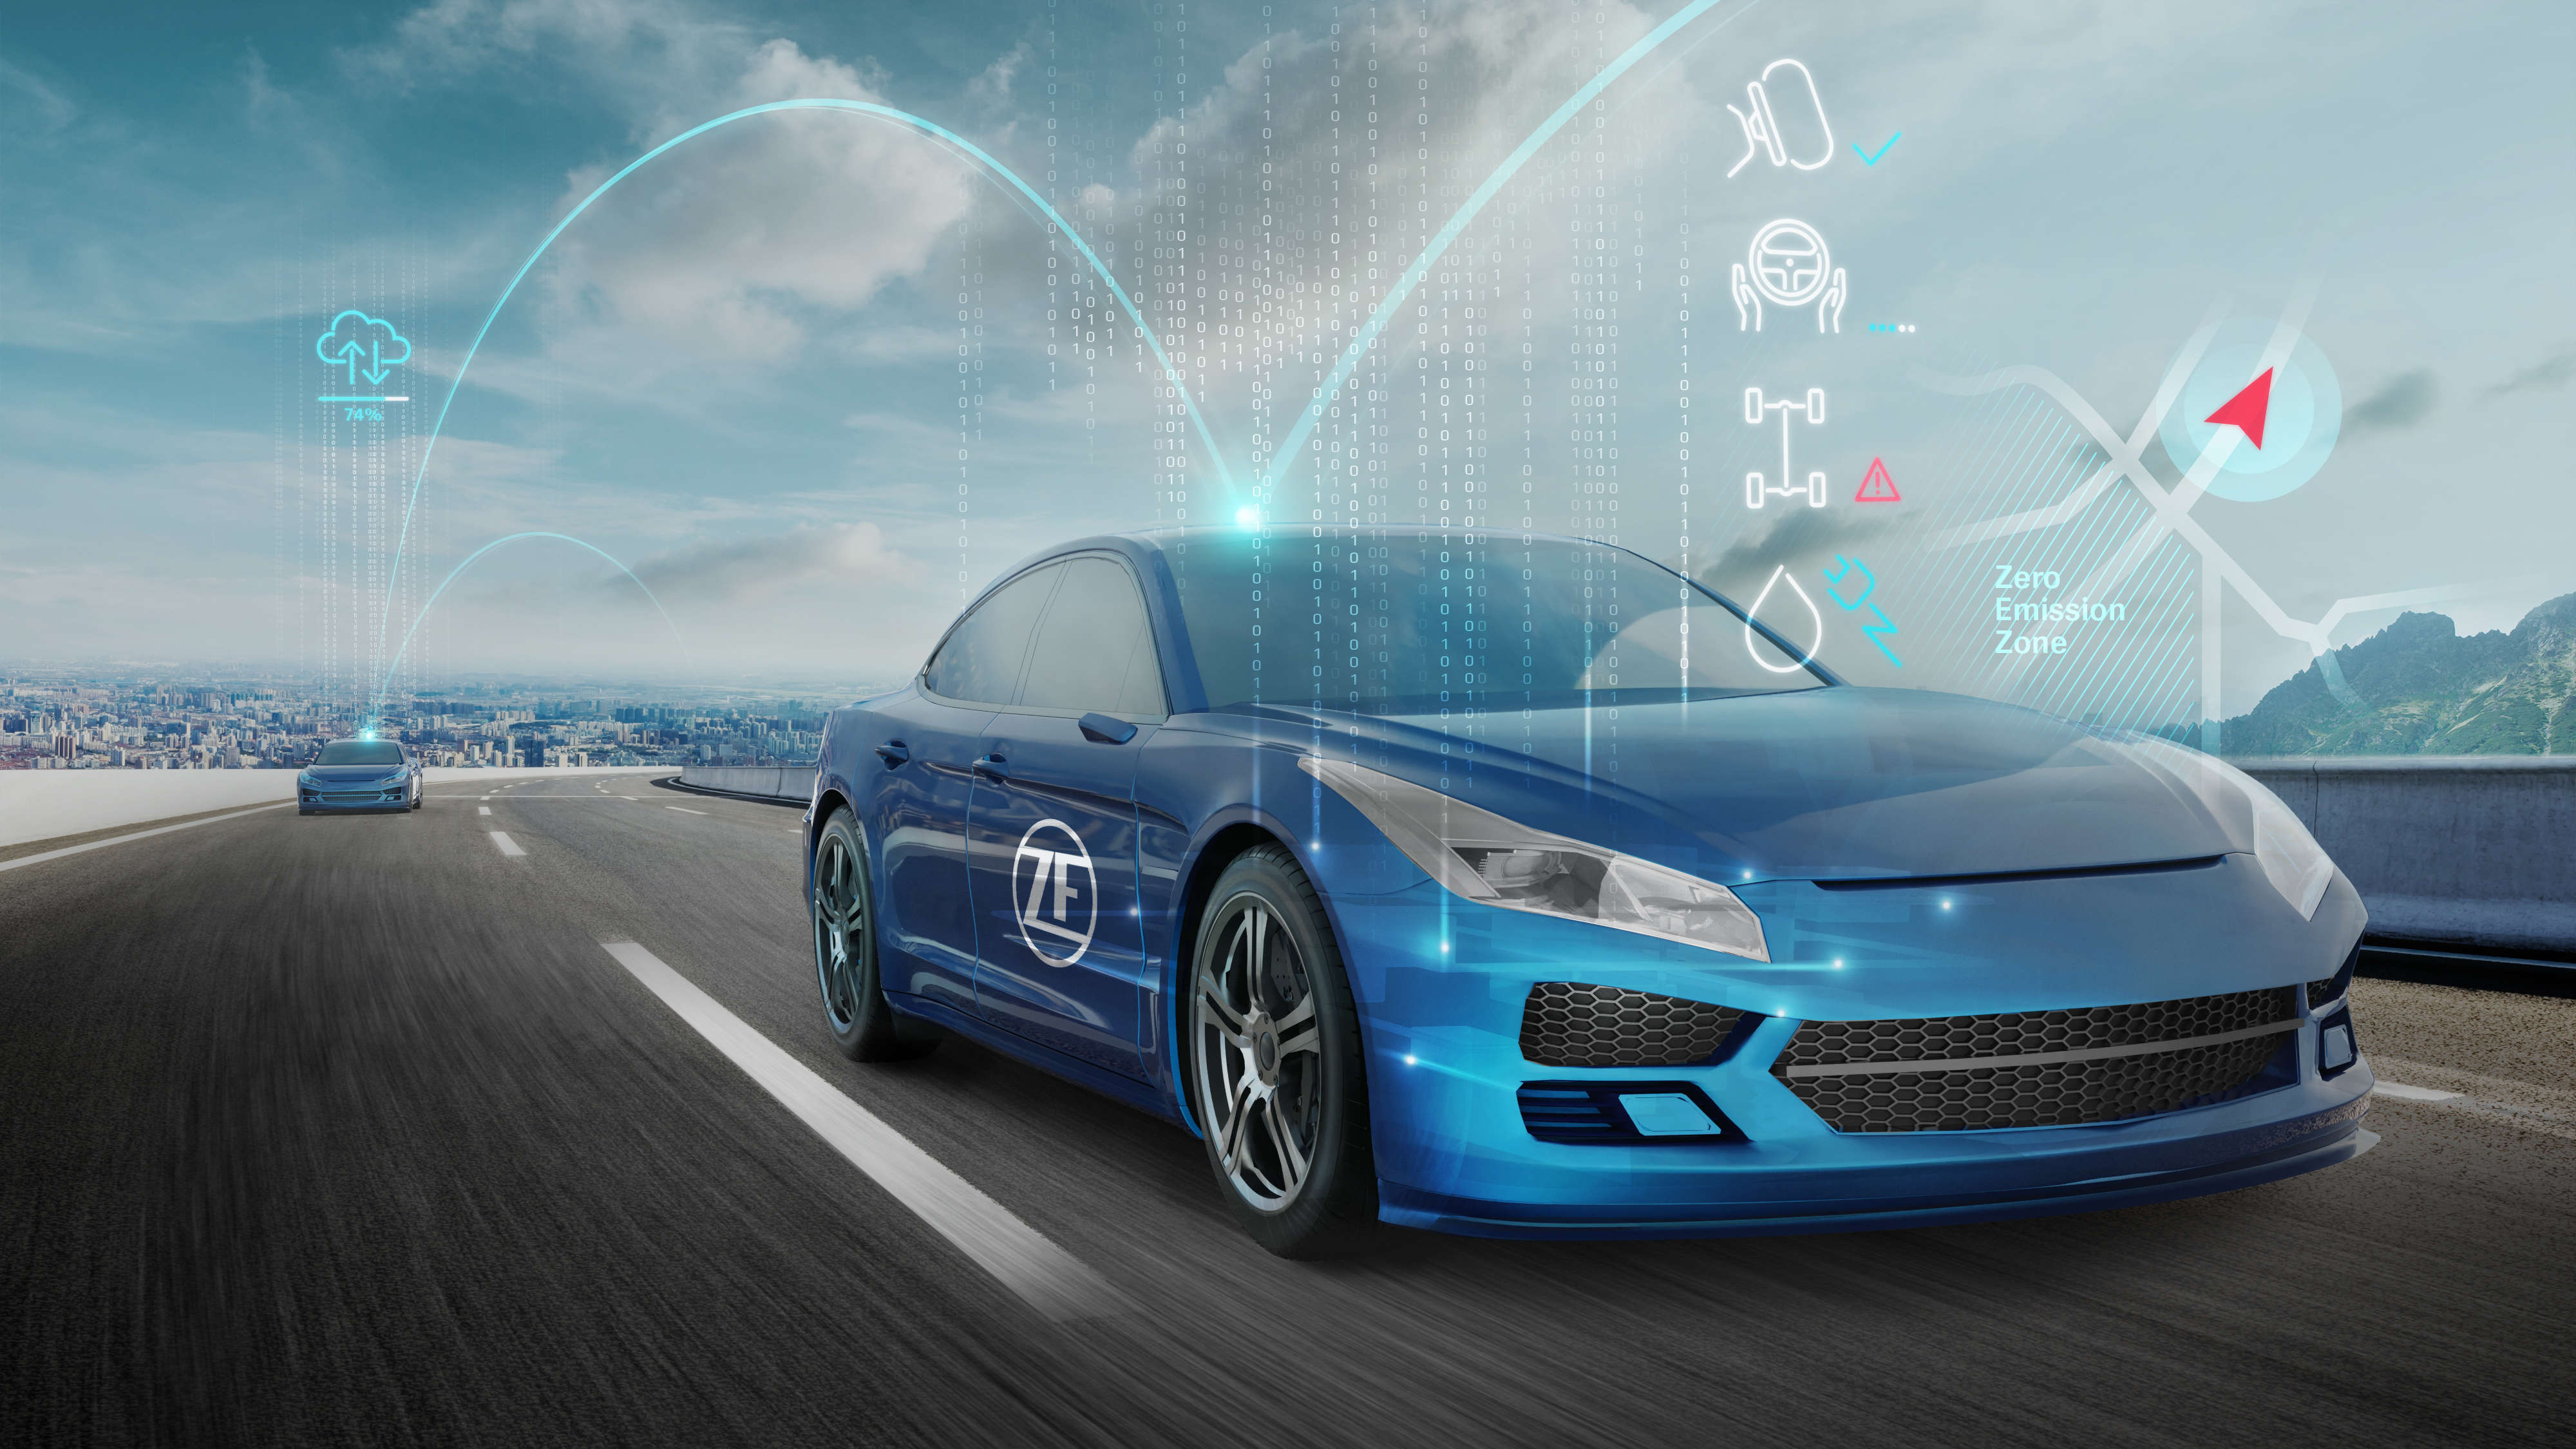 ZF establishes Data Venture Accelerator to expand data business